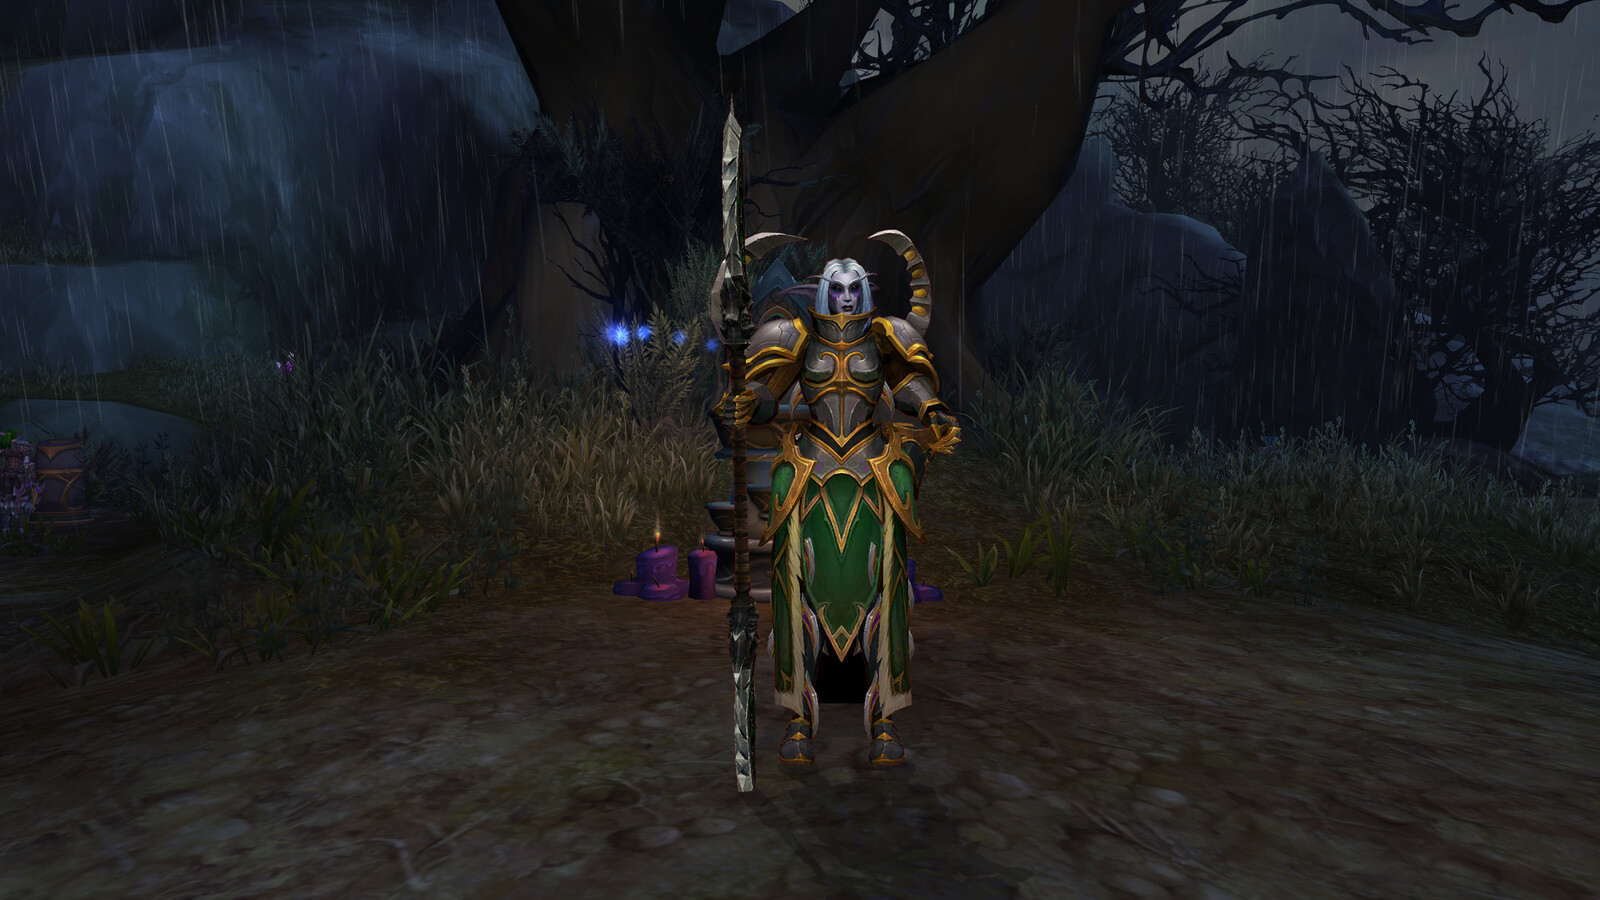 Night Elf at the Warden camp on the Broken Isles.